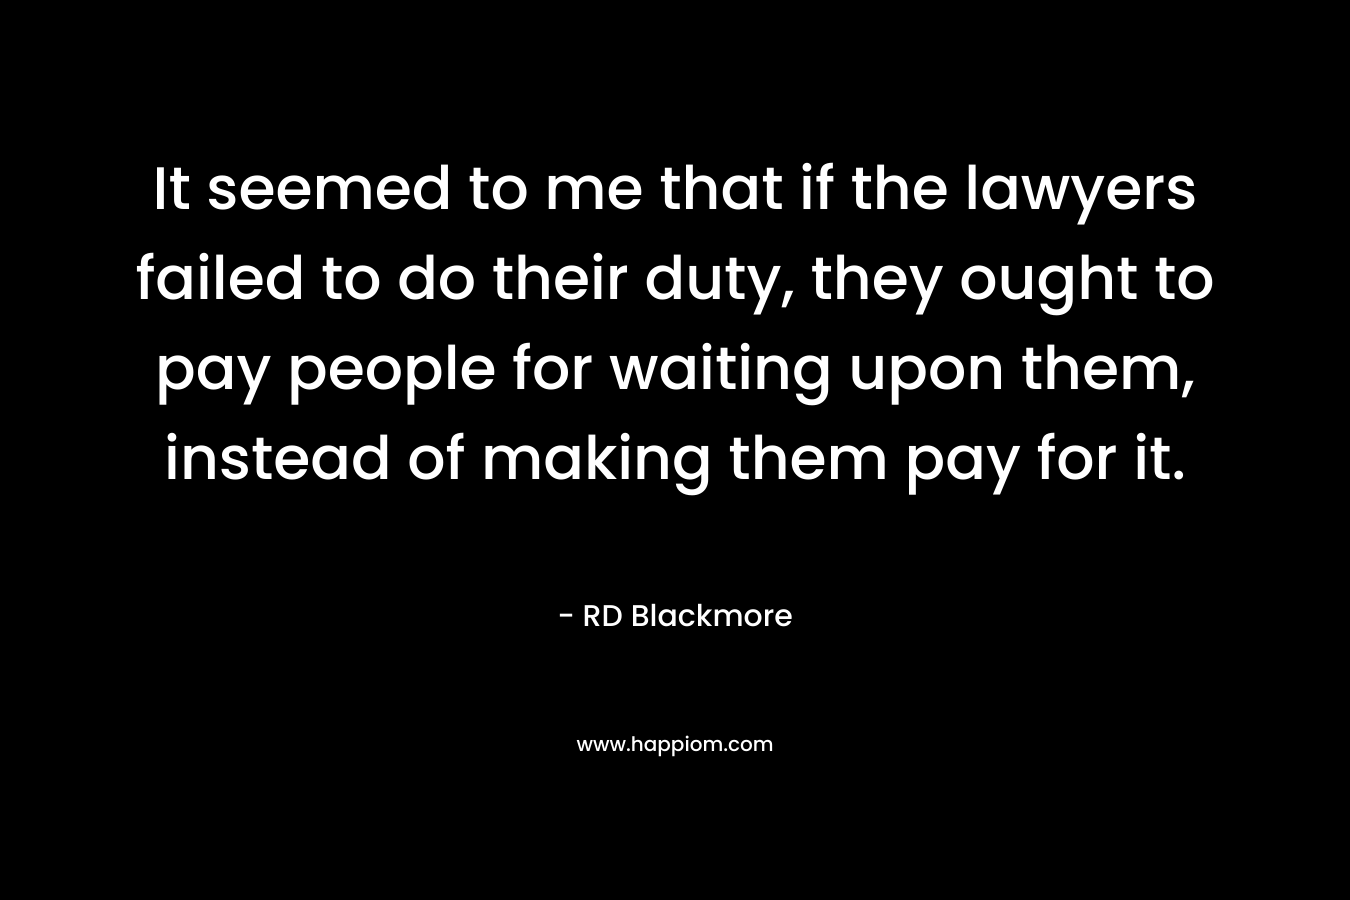 It seemed to me that if the lawyers failed to do their duty, they ought to pay people for waiting upon them, instead of making them pay for it. – RD Blackmore